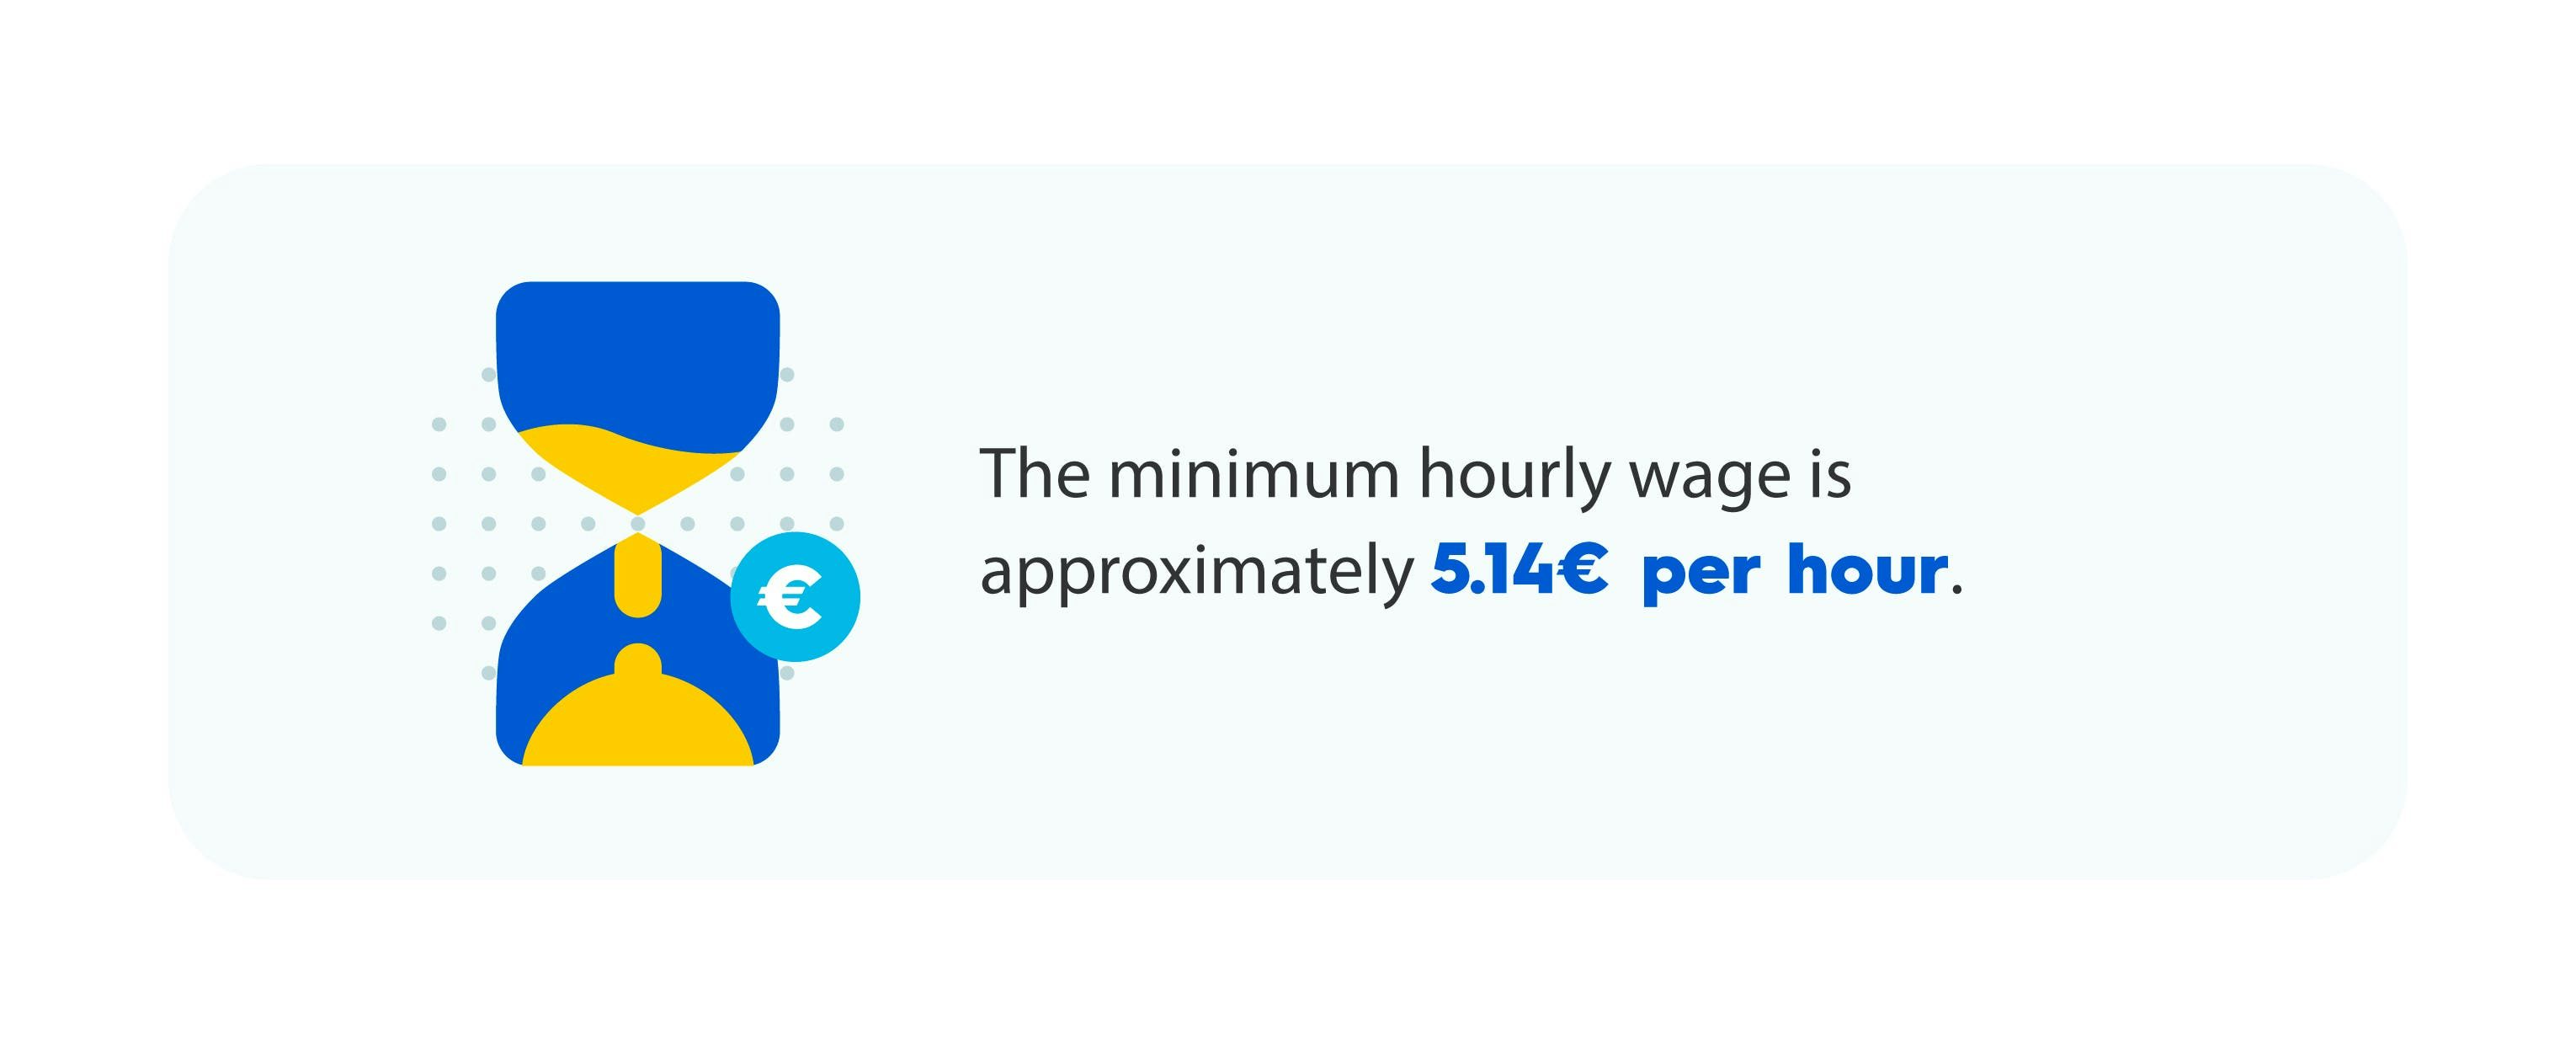 A graphic showing the minimum hourly wage in Portugal